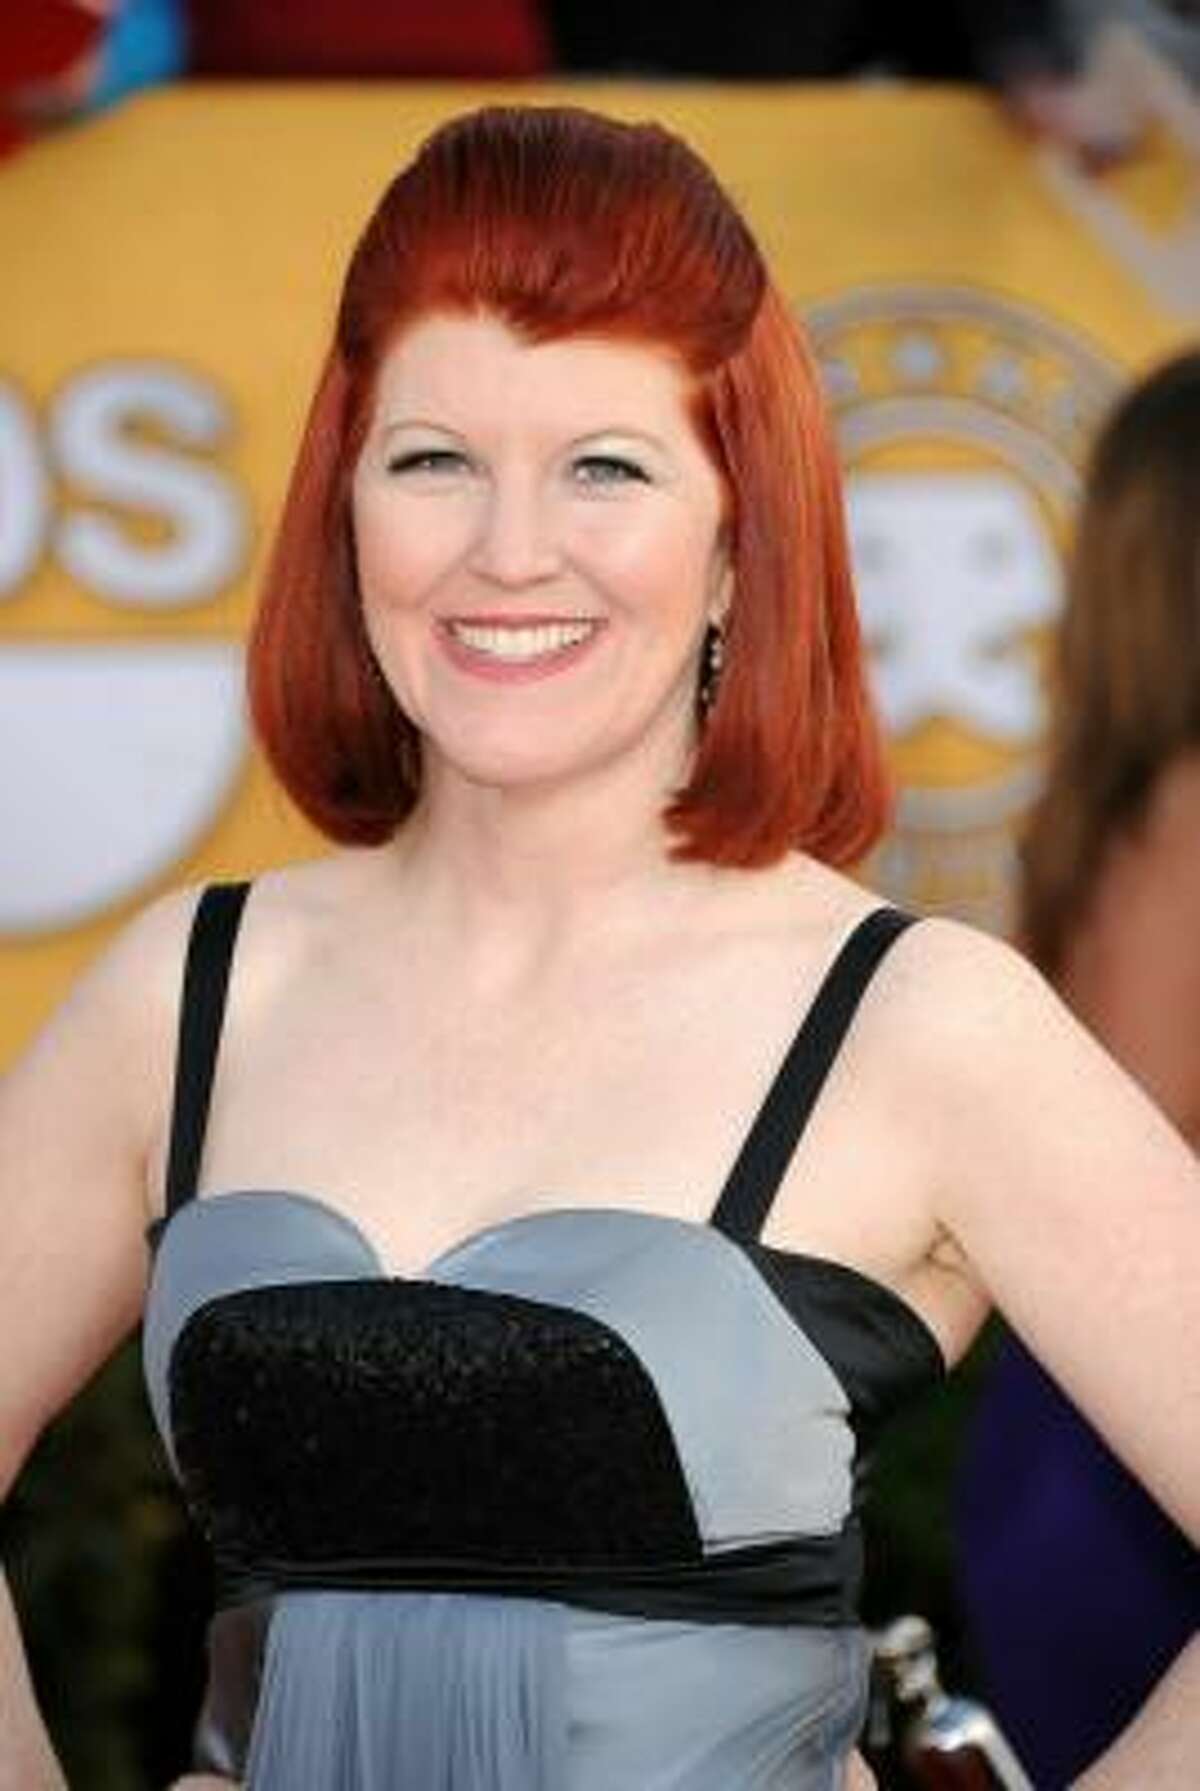 KATE FLANNERY, actress, "The Office": Pittsburgh, 21-7. The Steelers are pretty amazing this year. I don't know; I'm not sure. I'm from Pennsylvania, so I'm going to pick the Steelers.